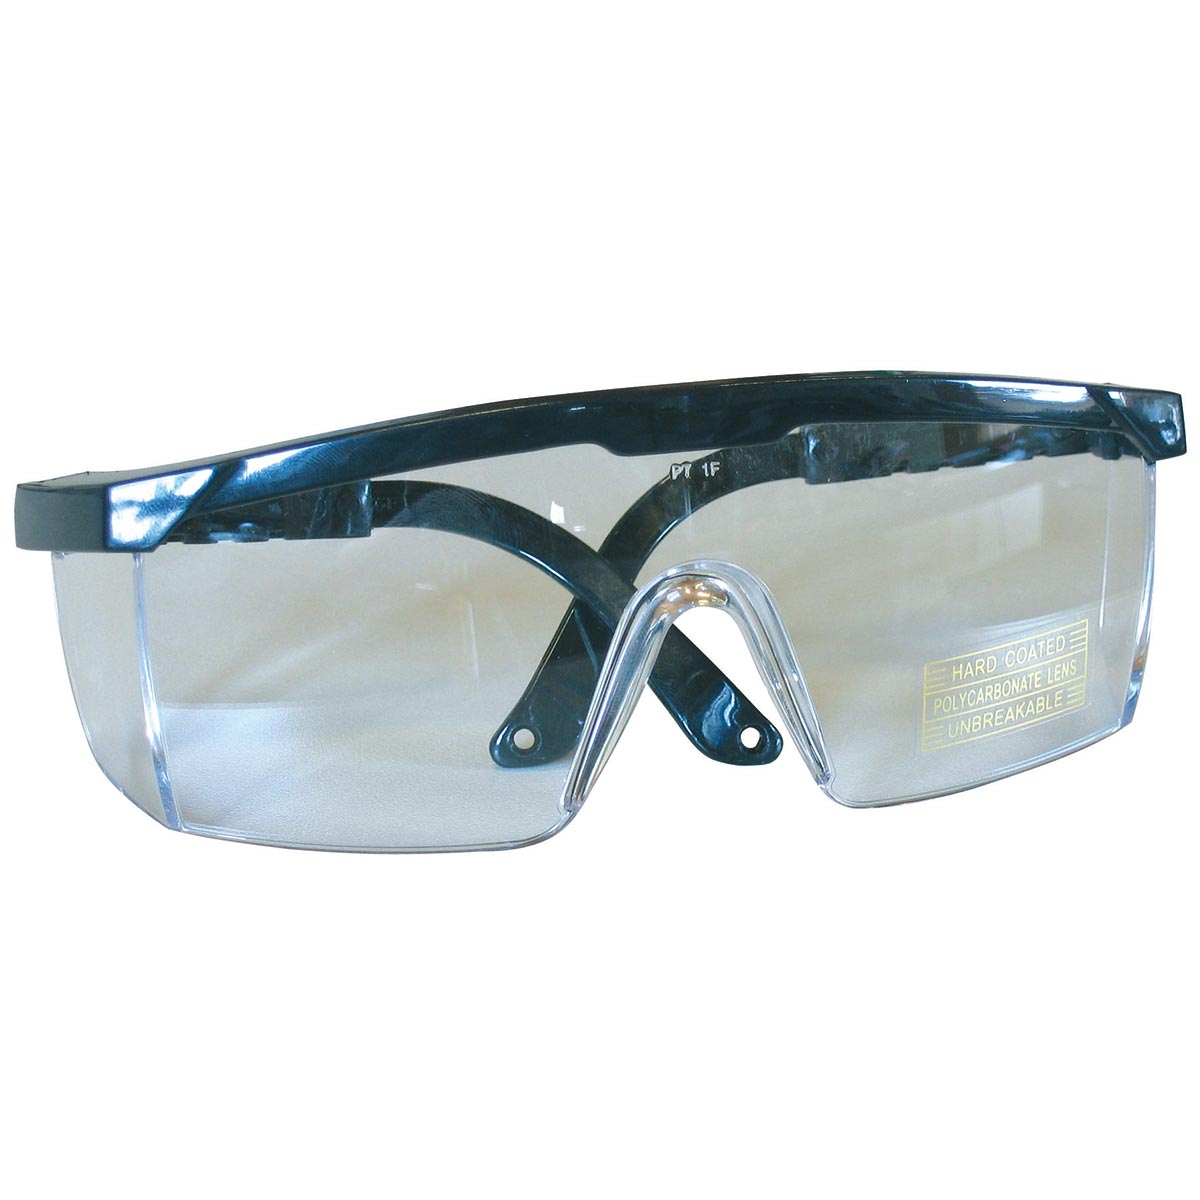 Protective Goggles with flexible straps